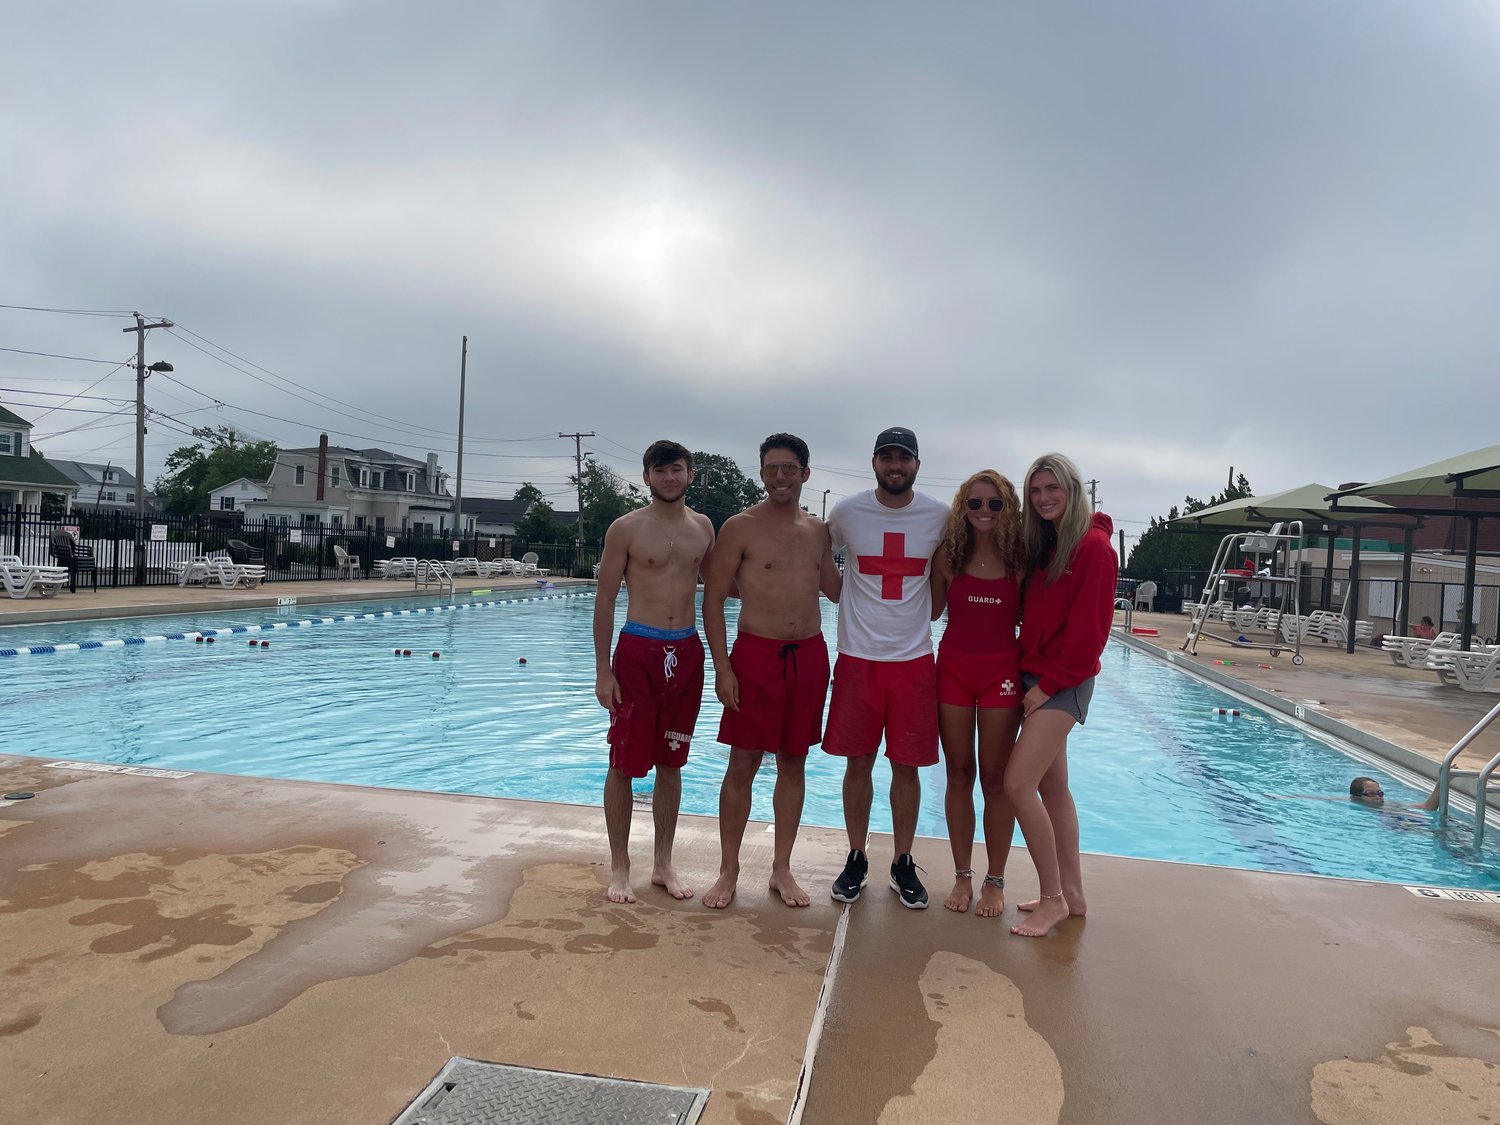 Swim instructors and lifeguards at the Patchogue Village pool. Center is Patchogue Beach Club manager and lifeguard Nick Constantino, who provided the tips.